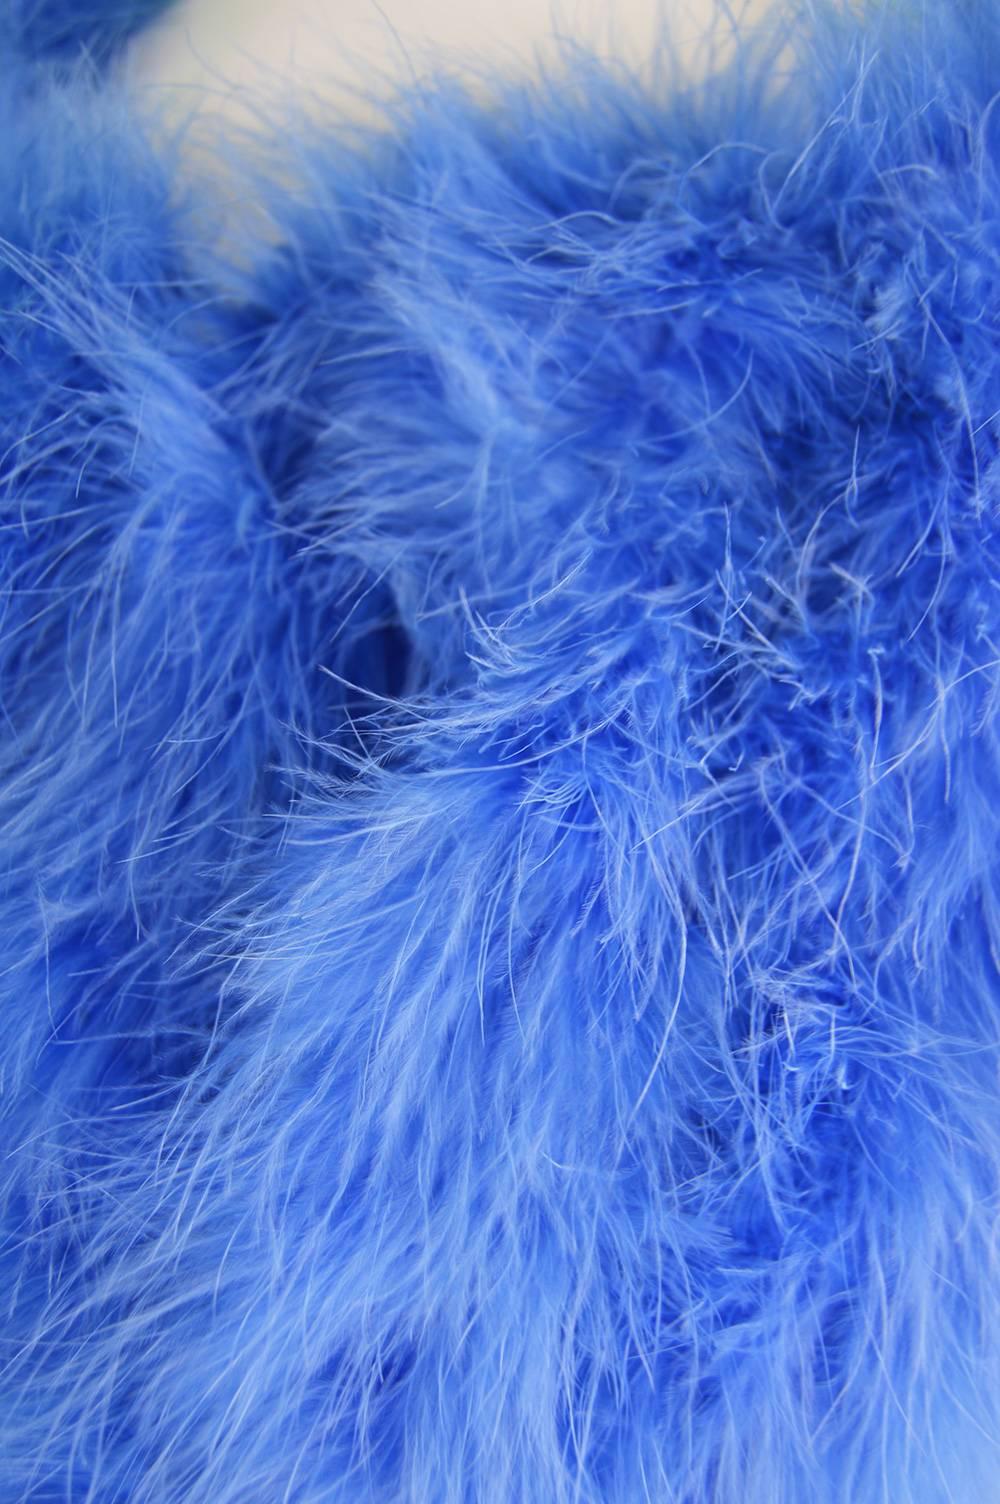 A glamorous vintage bolero jacket/ shrug from the 1960s by Sybil Zelker for Polly Peck. In a blue synthetic jersey with strips of fluffy marabou feathers to add a touch of glamour to any outfit. 

Estimated Size: Women's Small
Bust - up to 36